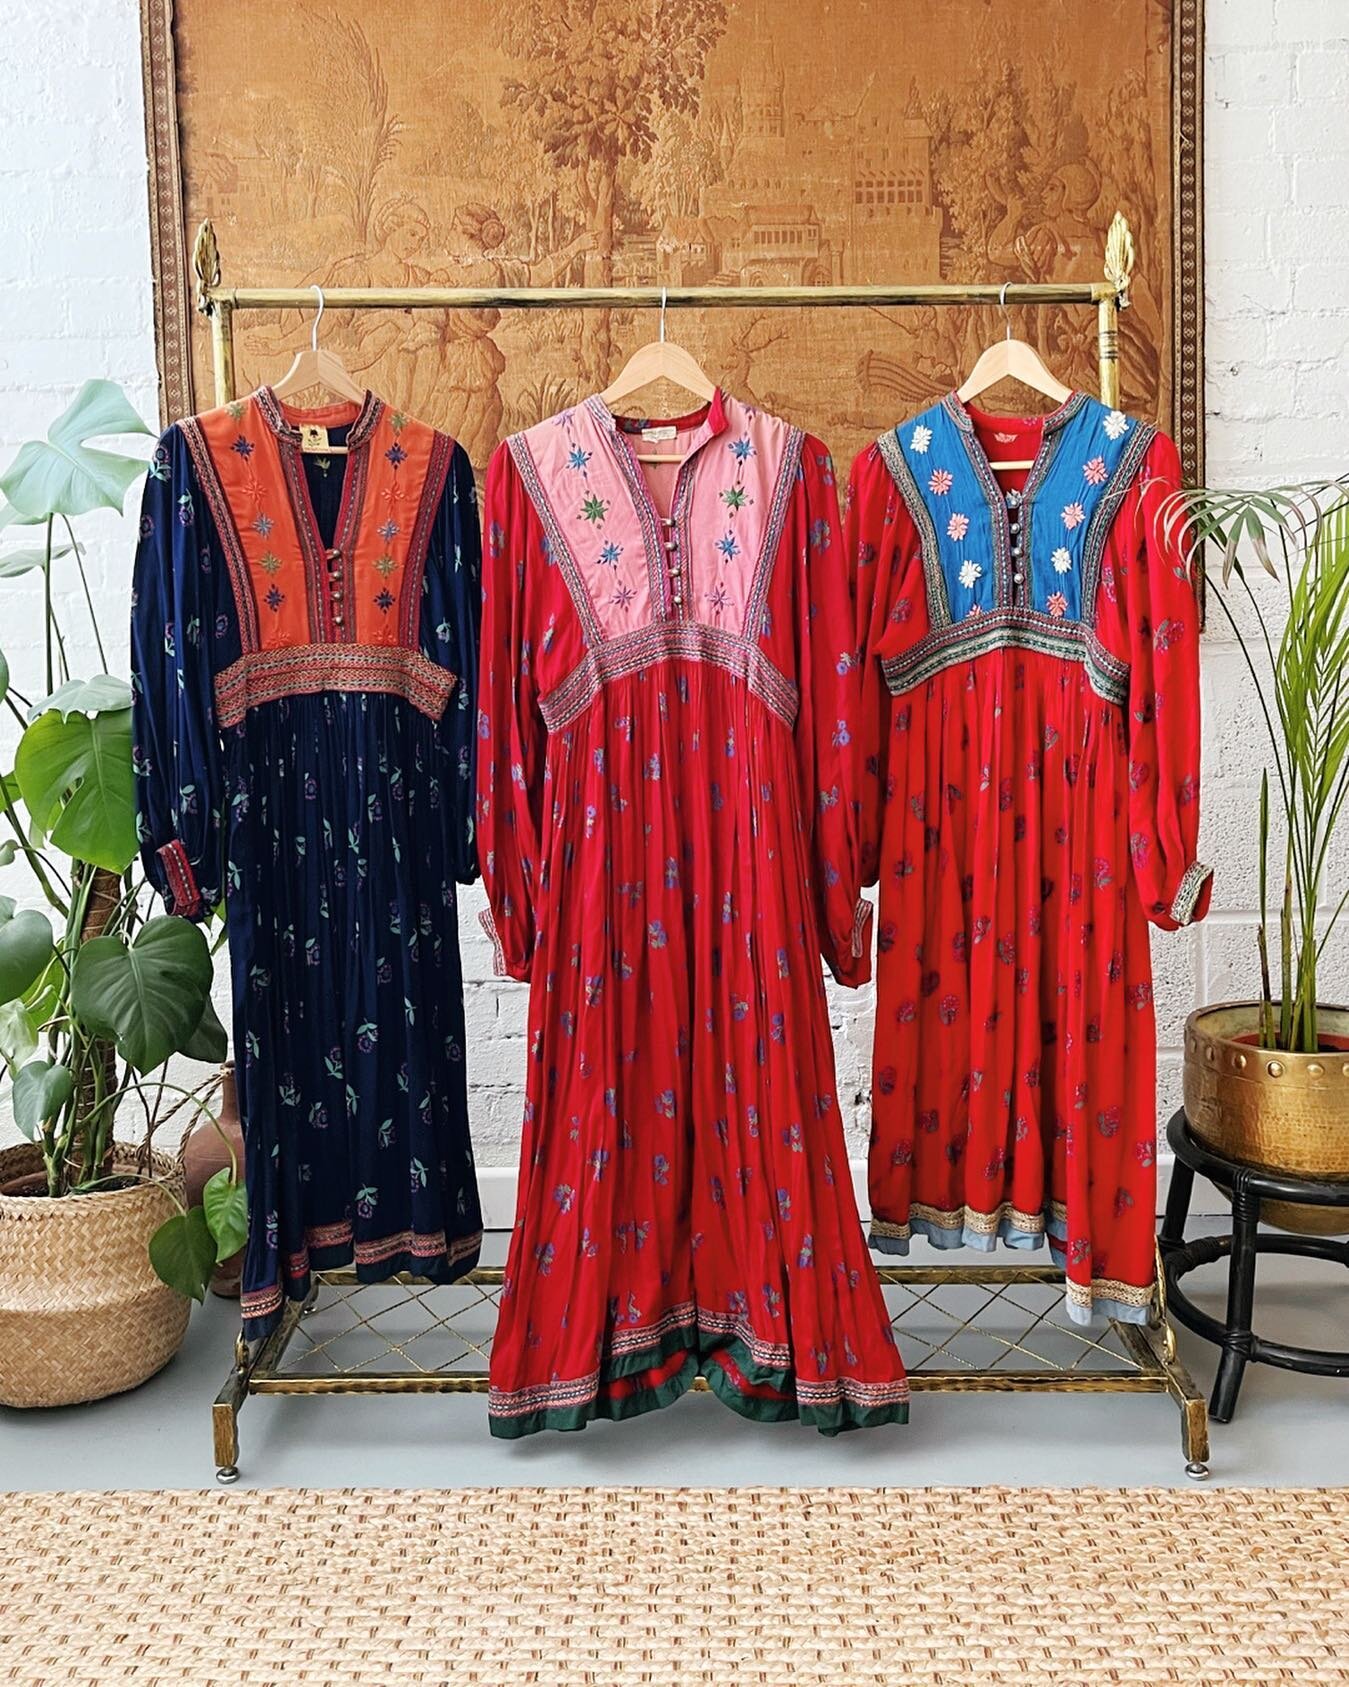 These gorgeous embroidered dresses from Afghanistan always look better in company so I couldn&rsquo;t help but include a few from my personal collection in this shot. The colours &amp; embroidery detail are unrivalled &amp; it&rsquo;s always a joy to